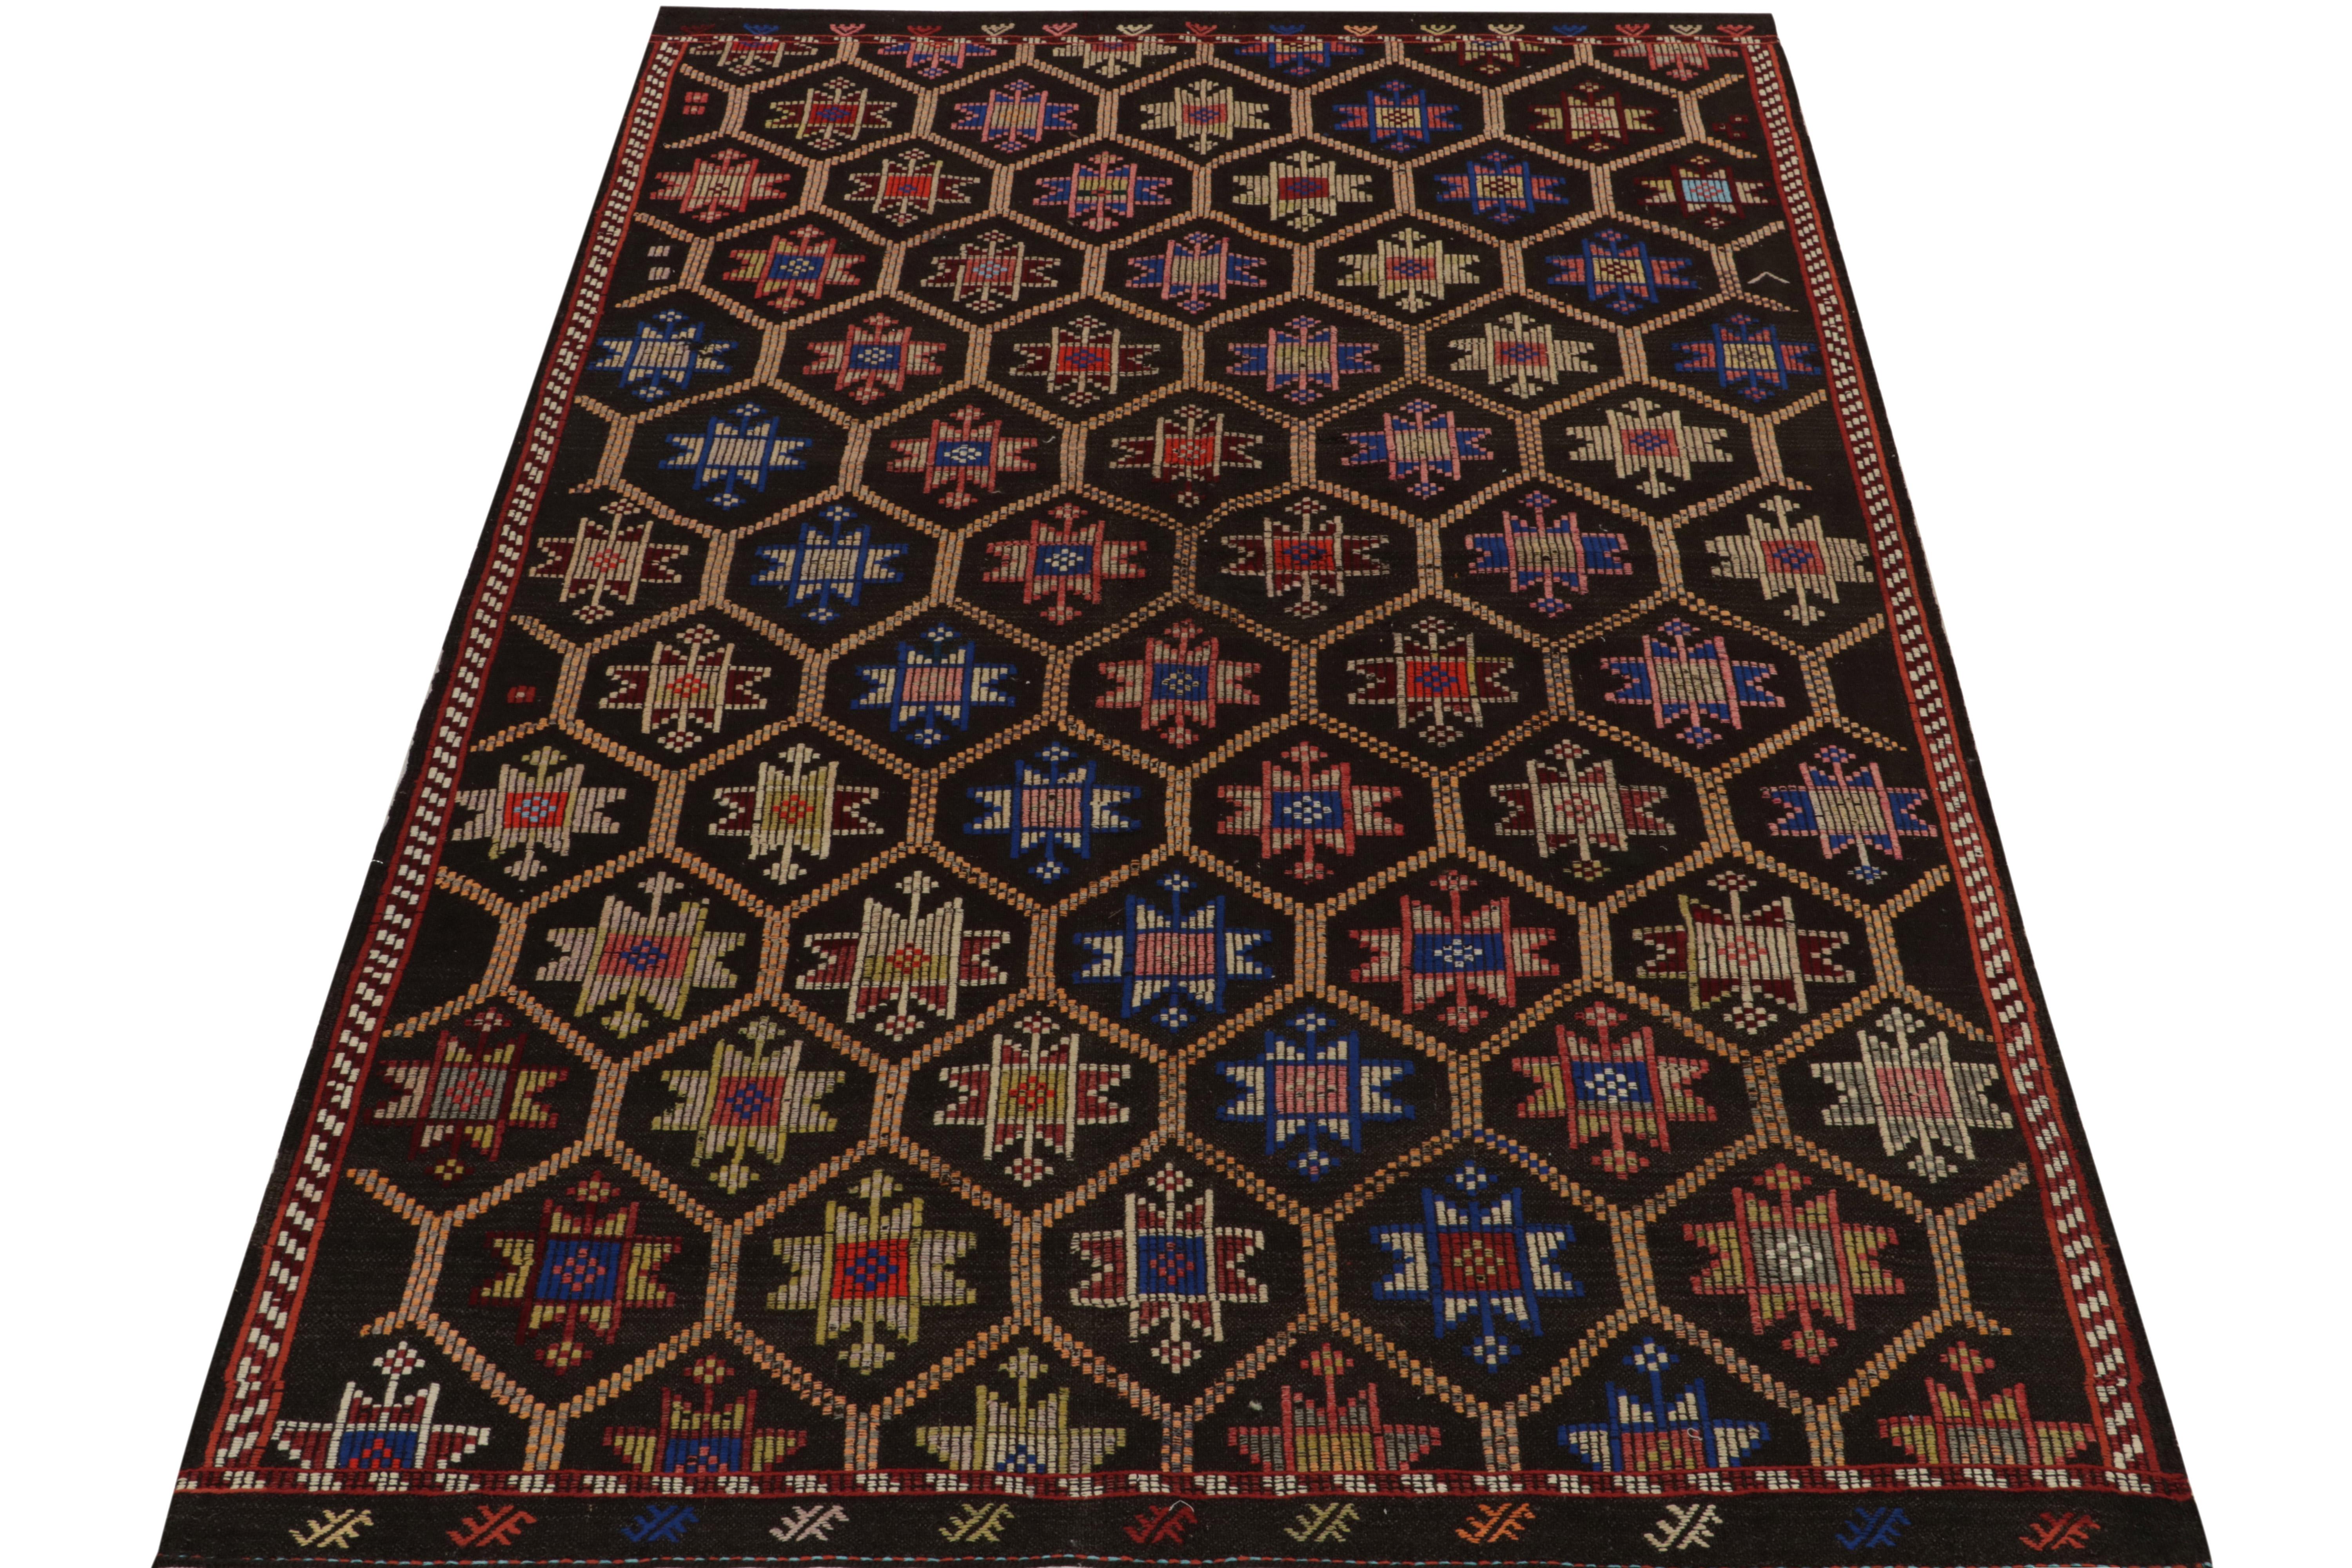 Celebrating rich Kurdish styles, a vintage Cecim kilim entering our flat weave collection. This particular 6x10 rug from the renowned style revels in impeccable embroidery & detailing of handwoven design. 

Exemplifying the tribal sensibilities of